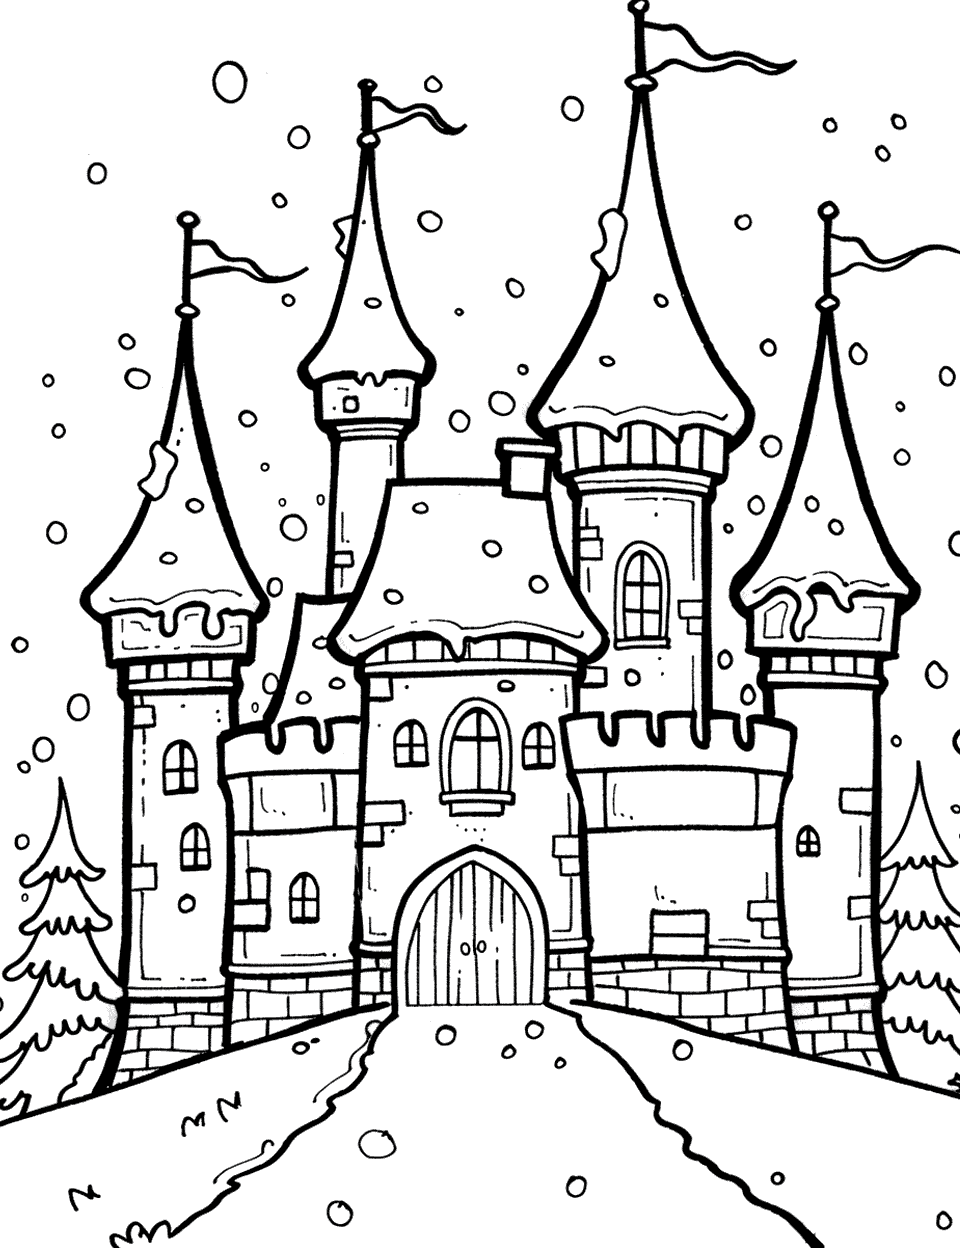 Castle in the Snow Coloring Page - A cozy castle scene with snow gently falling around it.